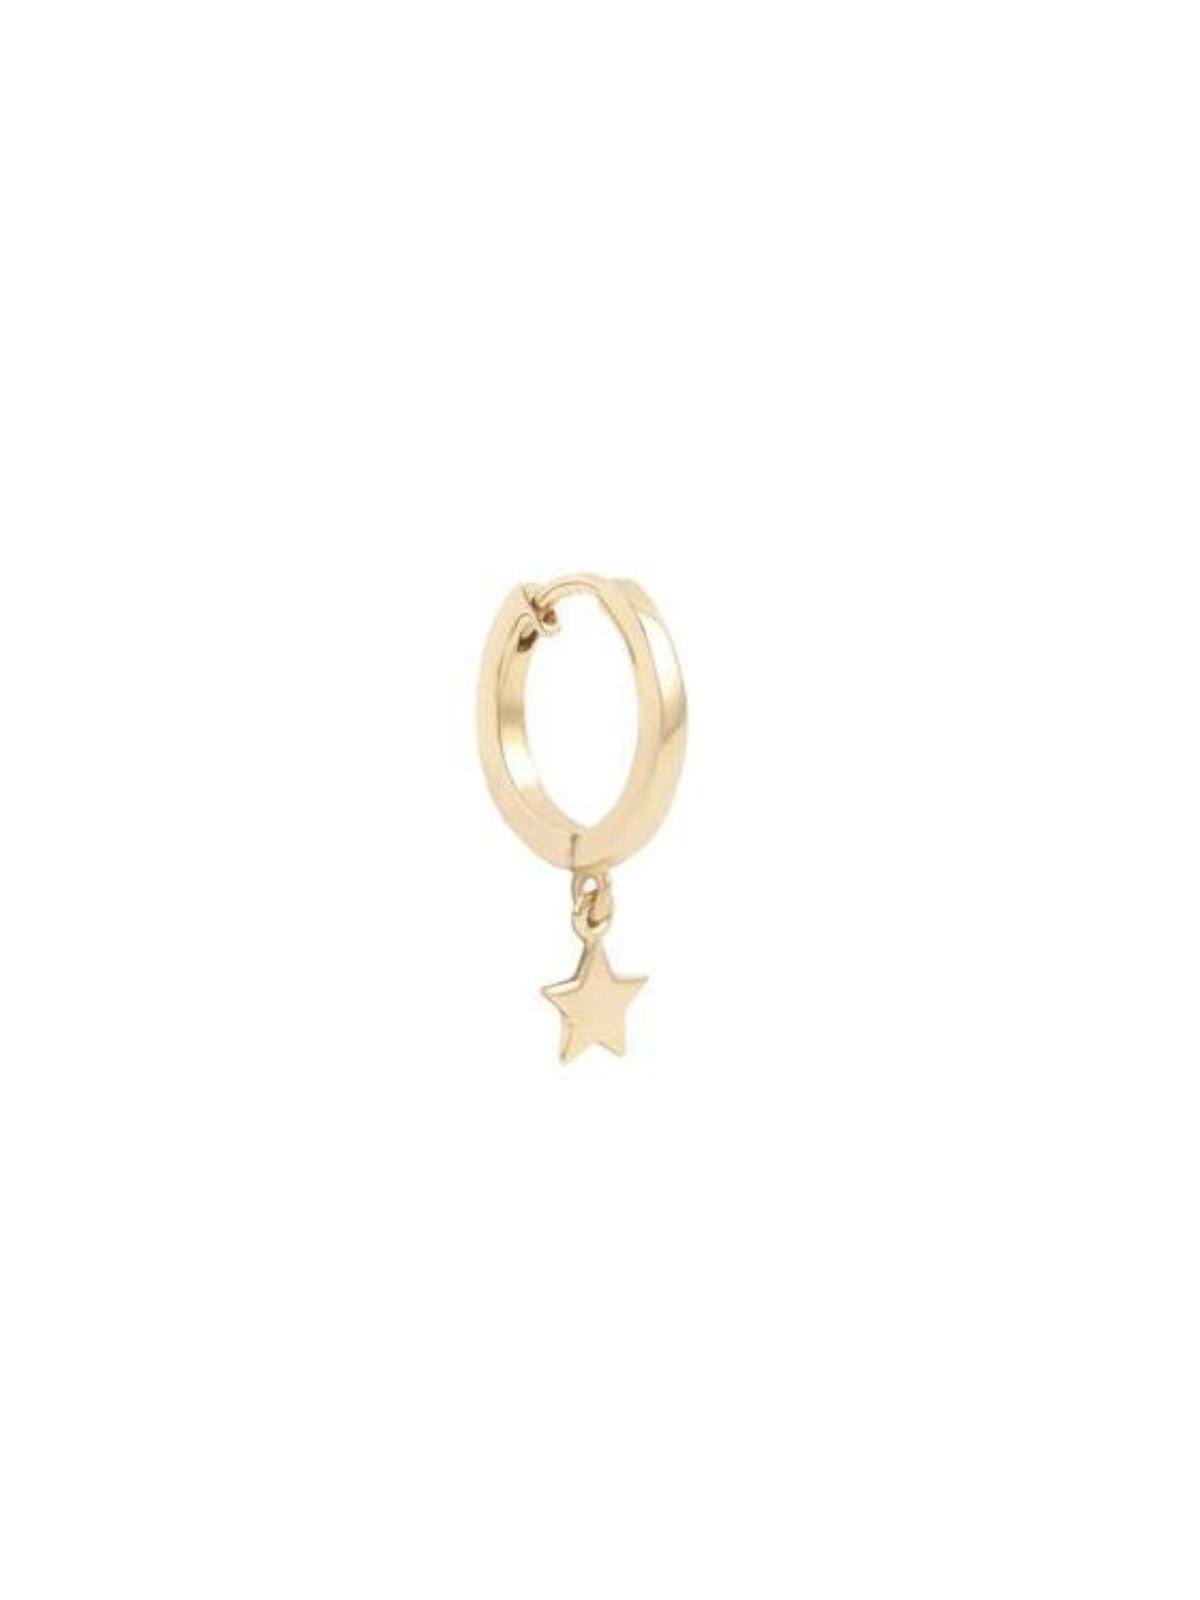 By Charlotte 14k Wish Upon A Star Hoop - Single